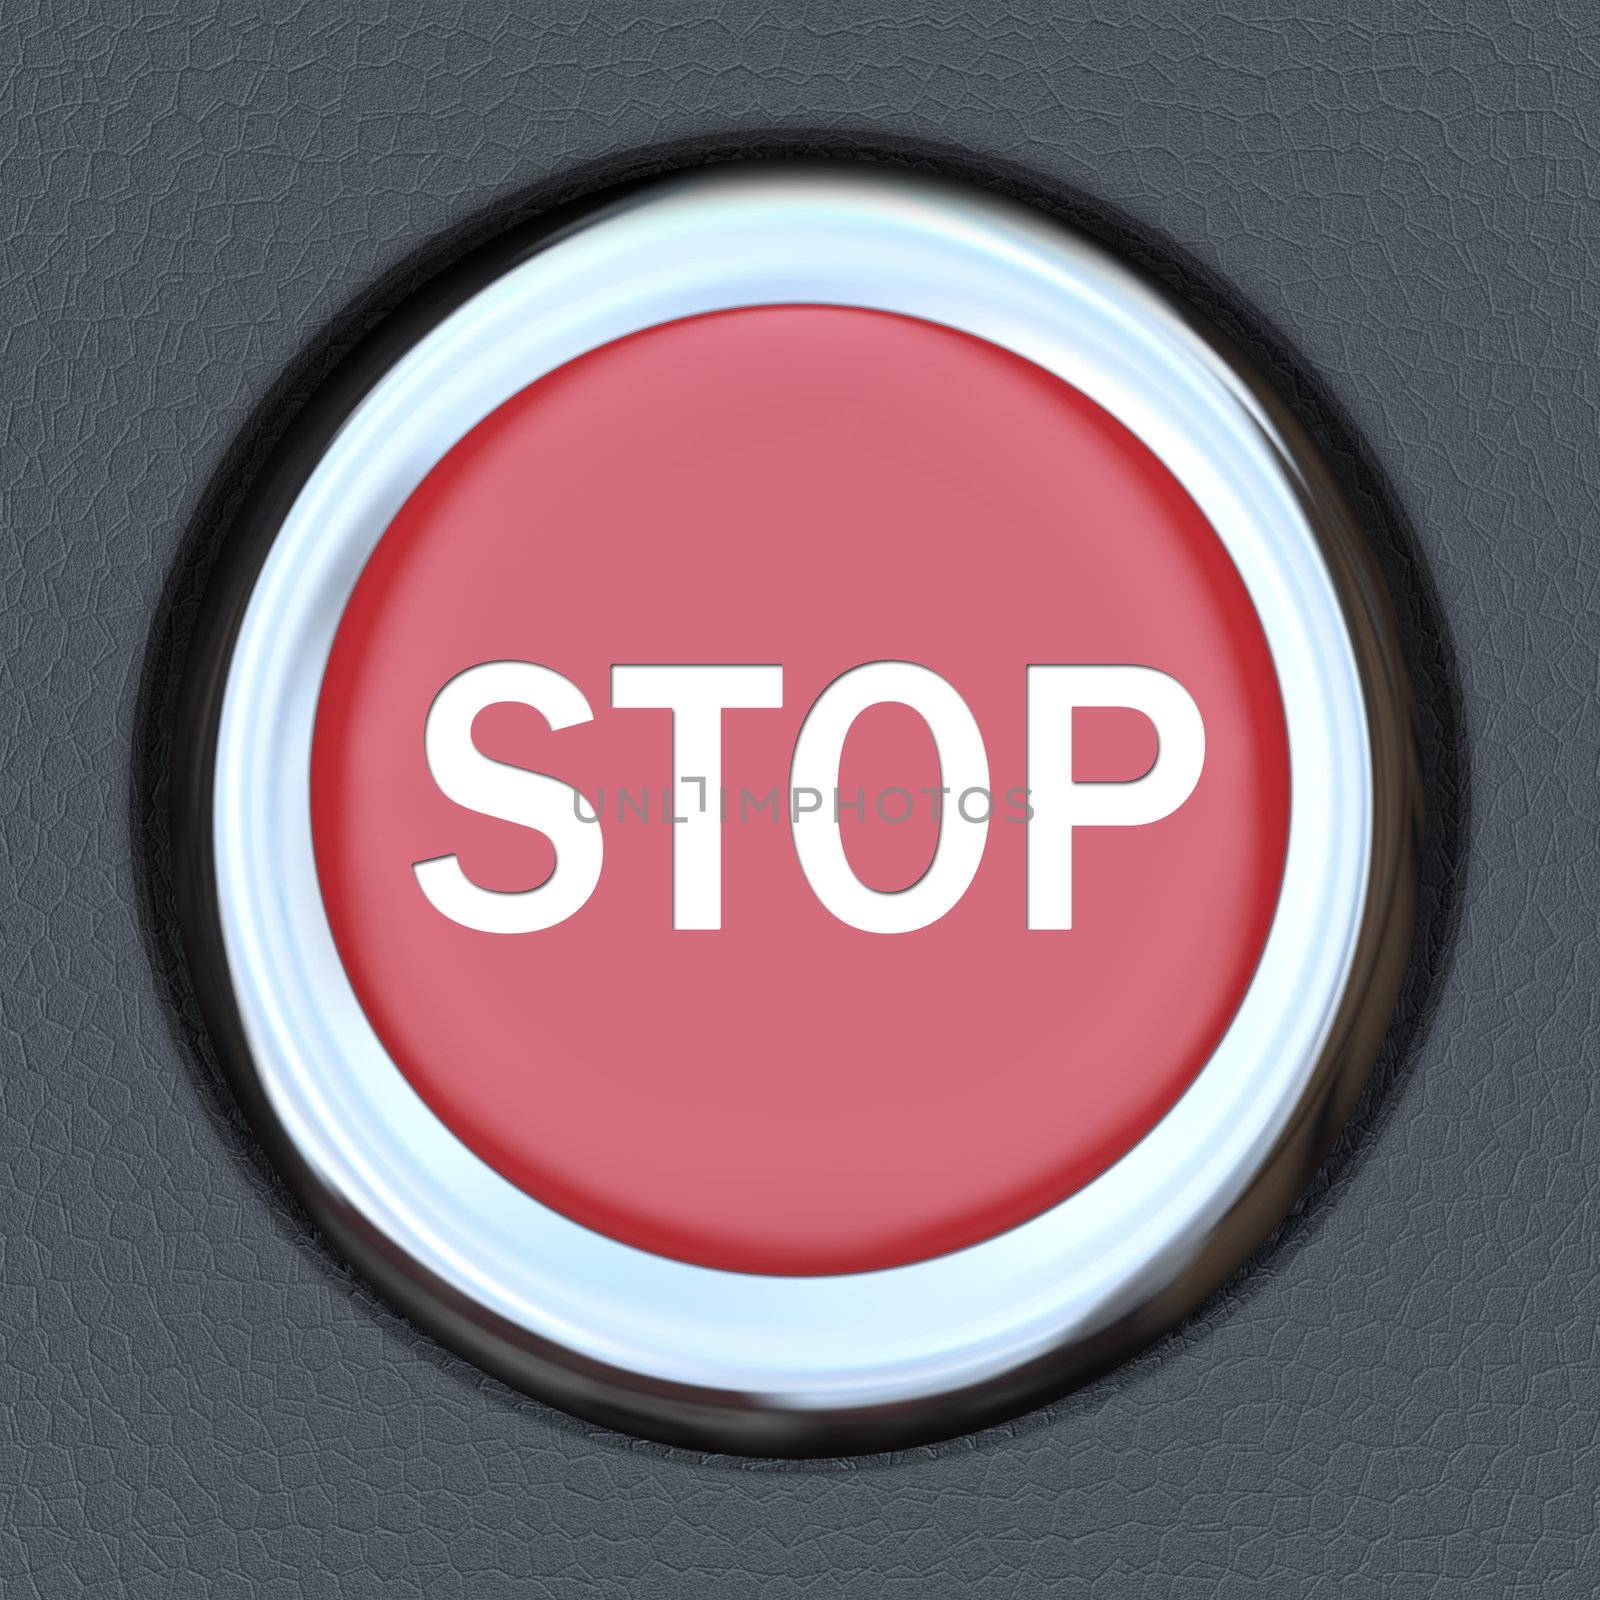 A red car ignition button with the word Stop to symbolize danger or emergency and the immediate need to turn off the engine